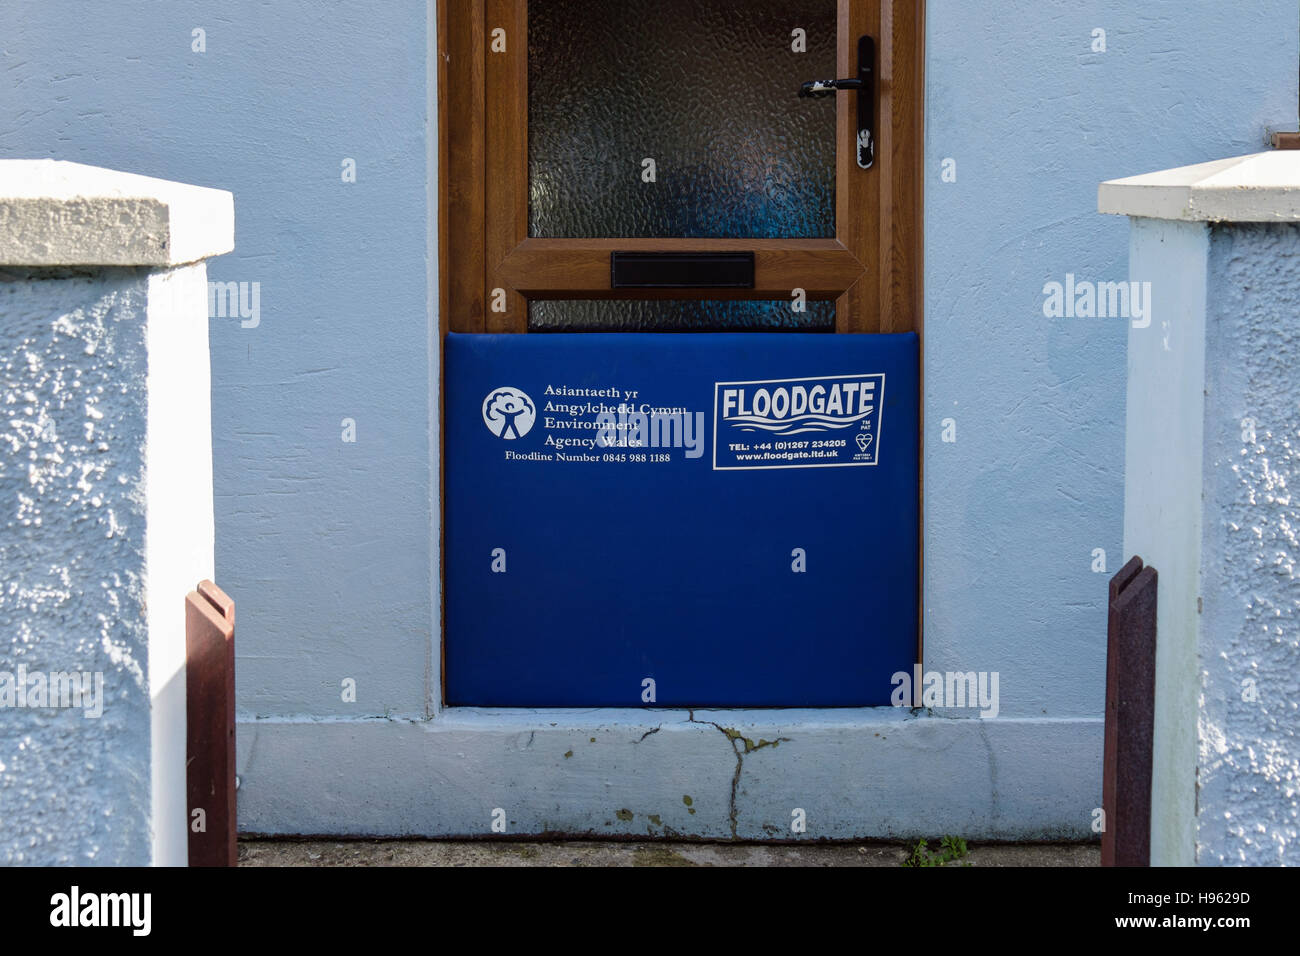 Environmental Agency Wales Floodgate across a front door in a house in Lower Fishguard, Pembrokeshire, Wales, UK, Britain Stock Photo